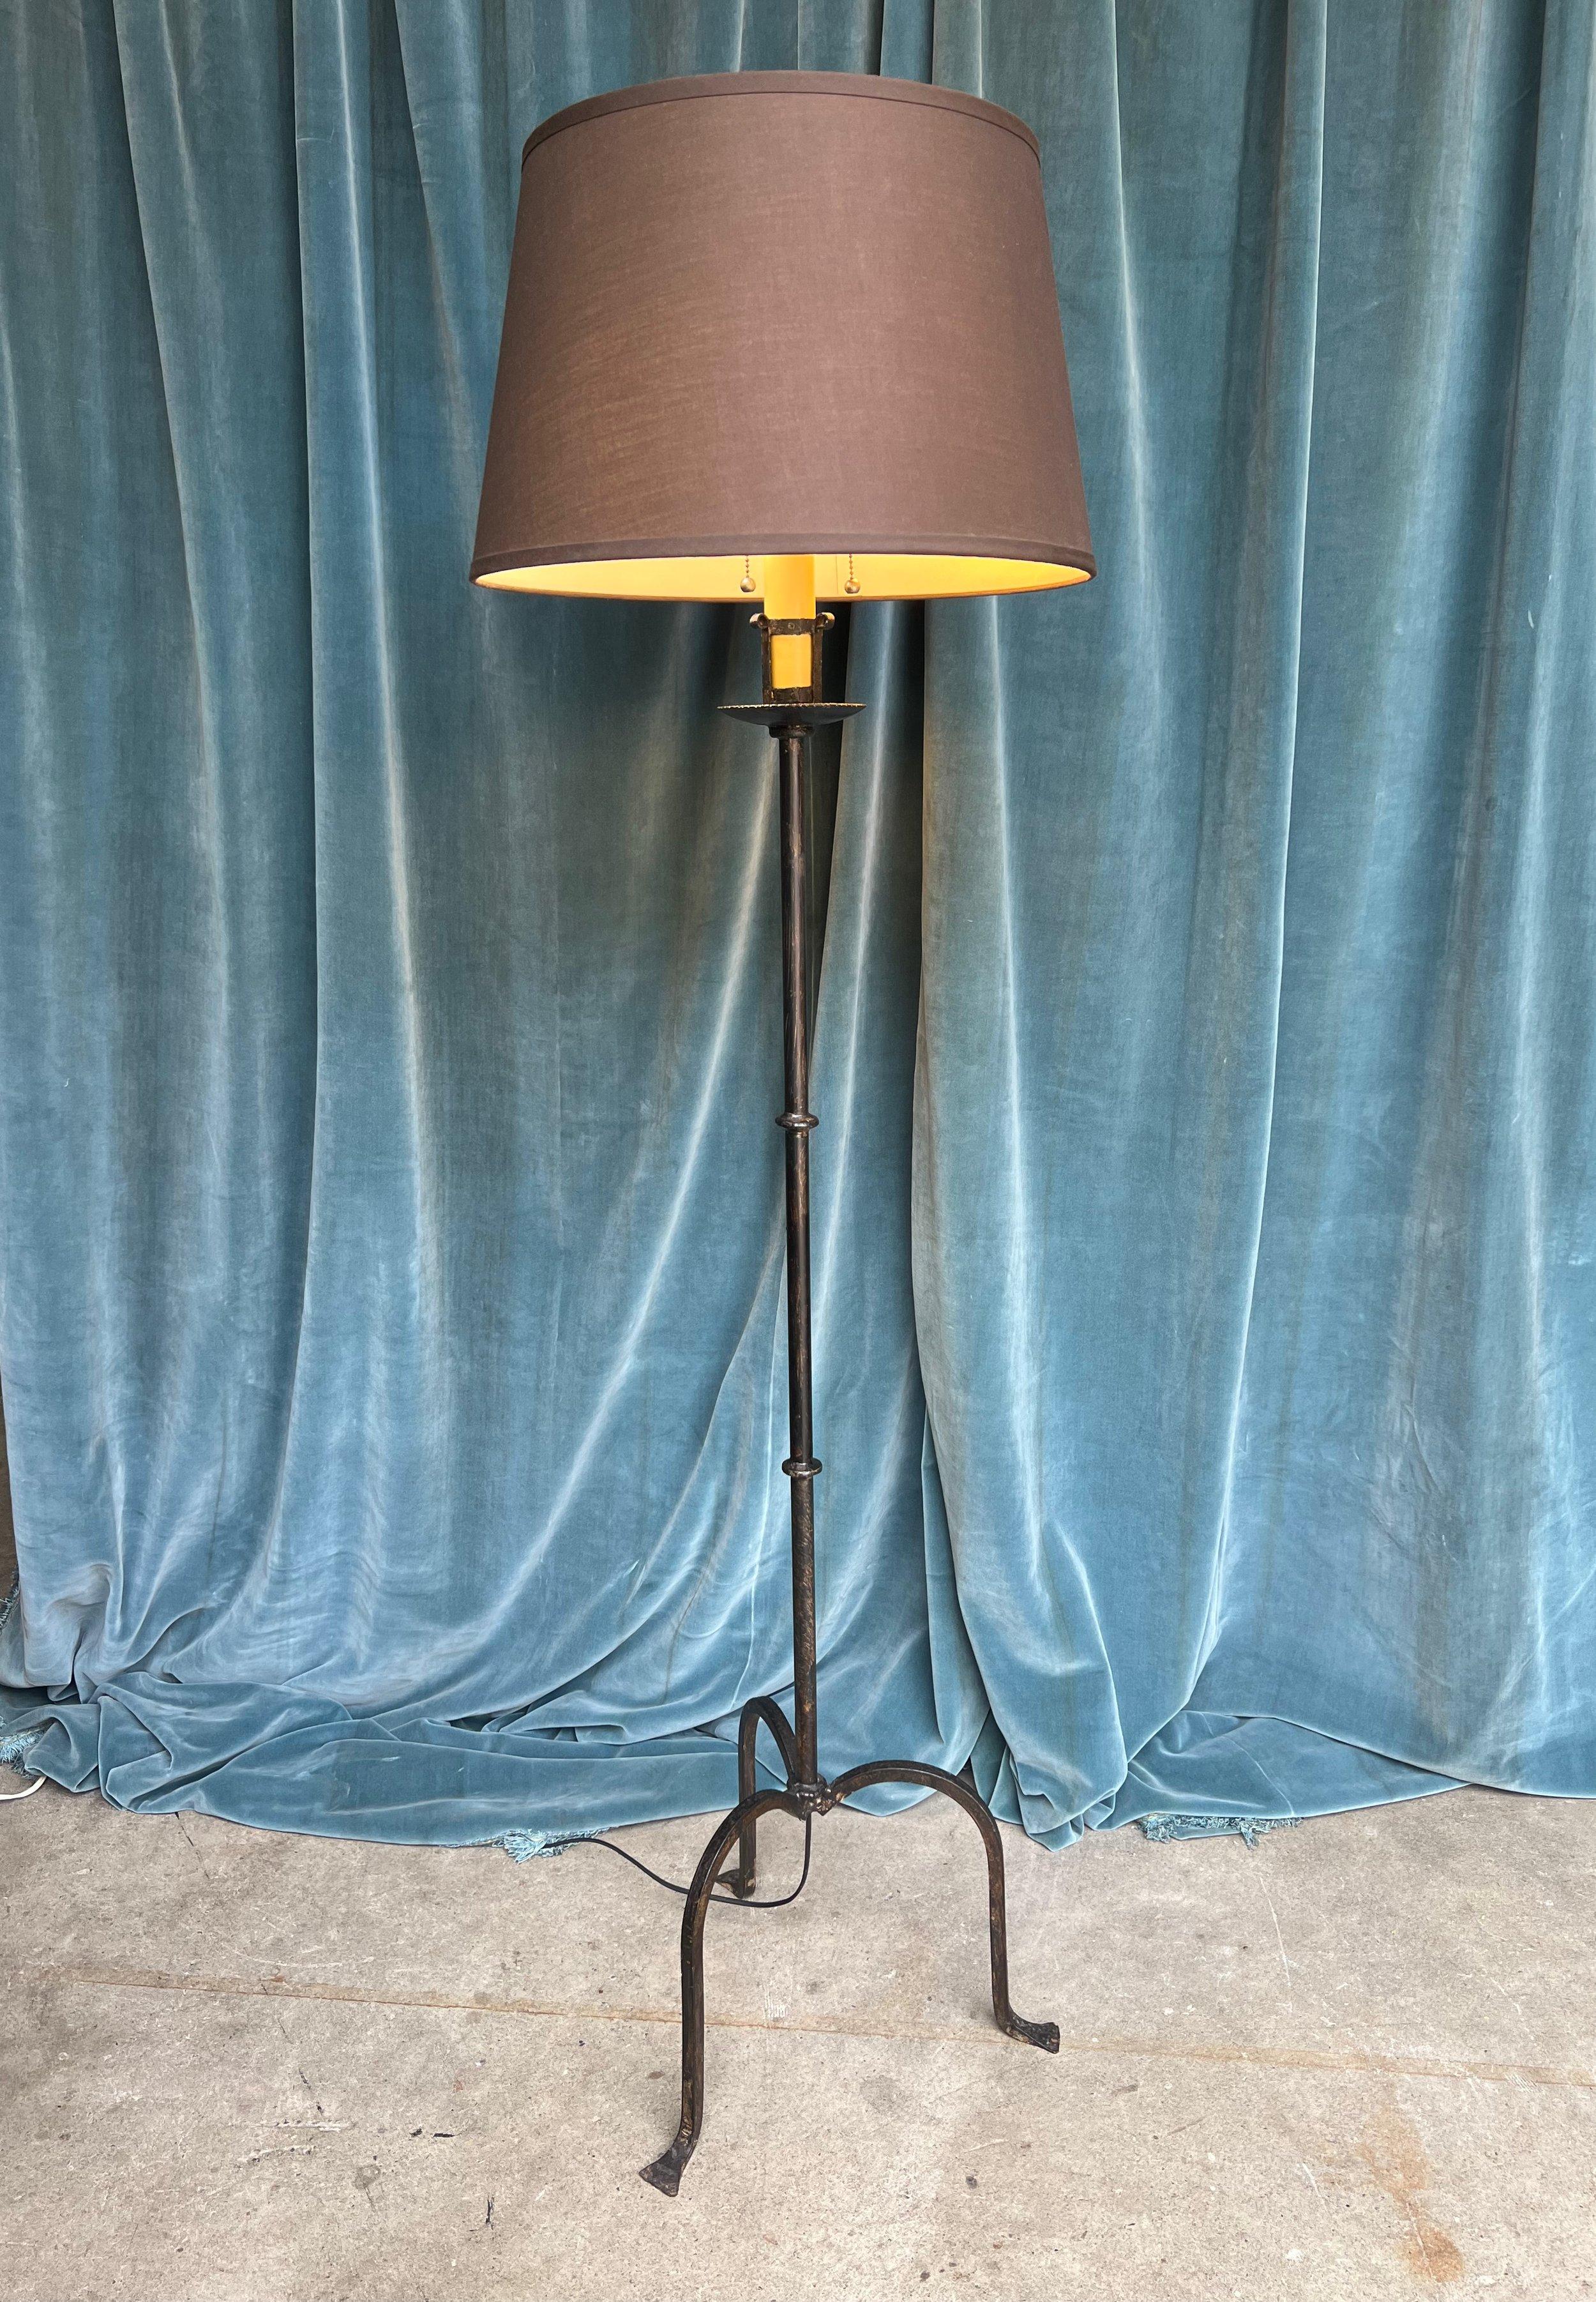 A unique and elegant mid-century modern Spanish iron floor lamp that seamlessly merges style and functionality. Handmade in the 1950s, this remarkable piece showcases excellent quality and timeless appeal. Measuring 64 inches high with a 16 inch